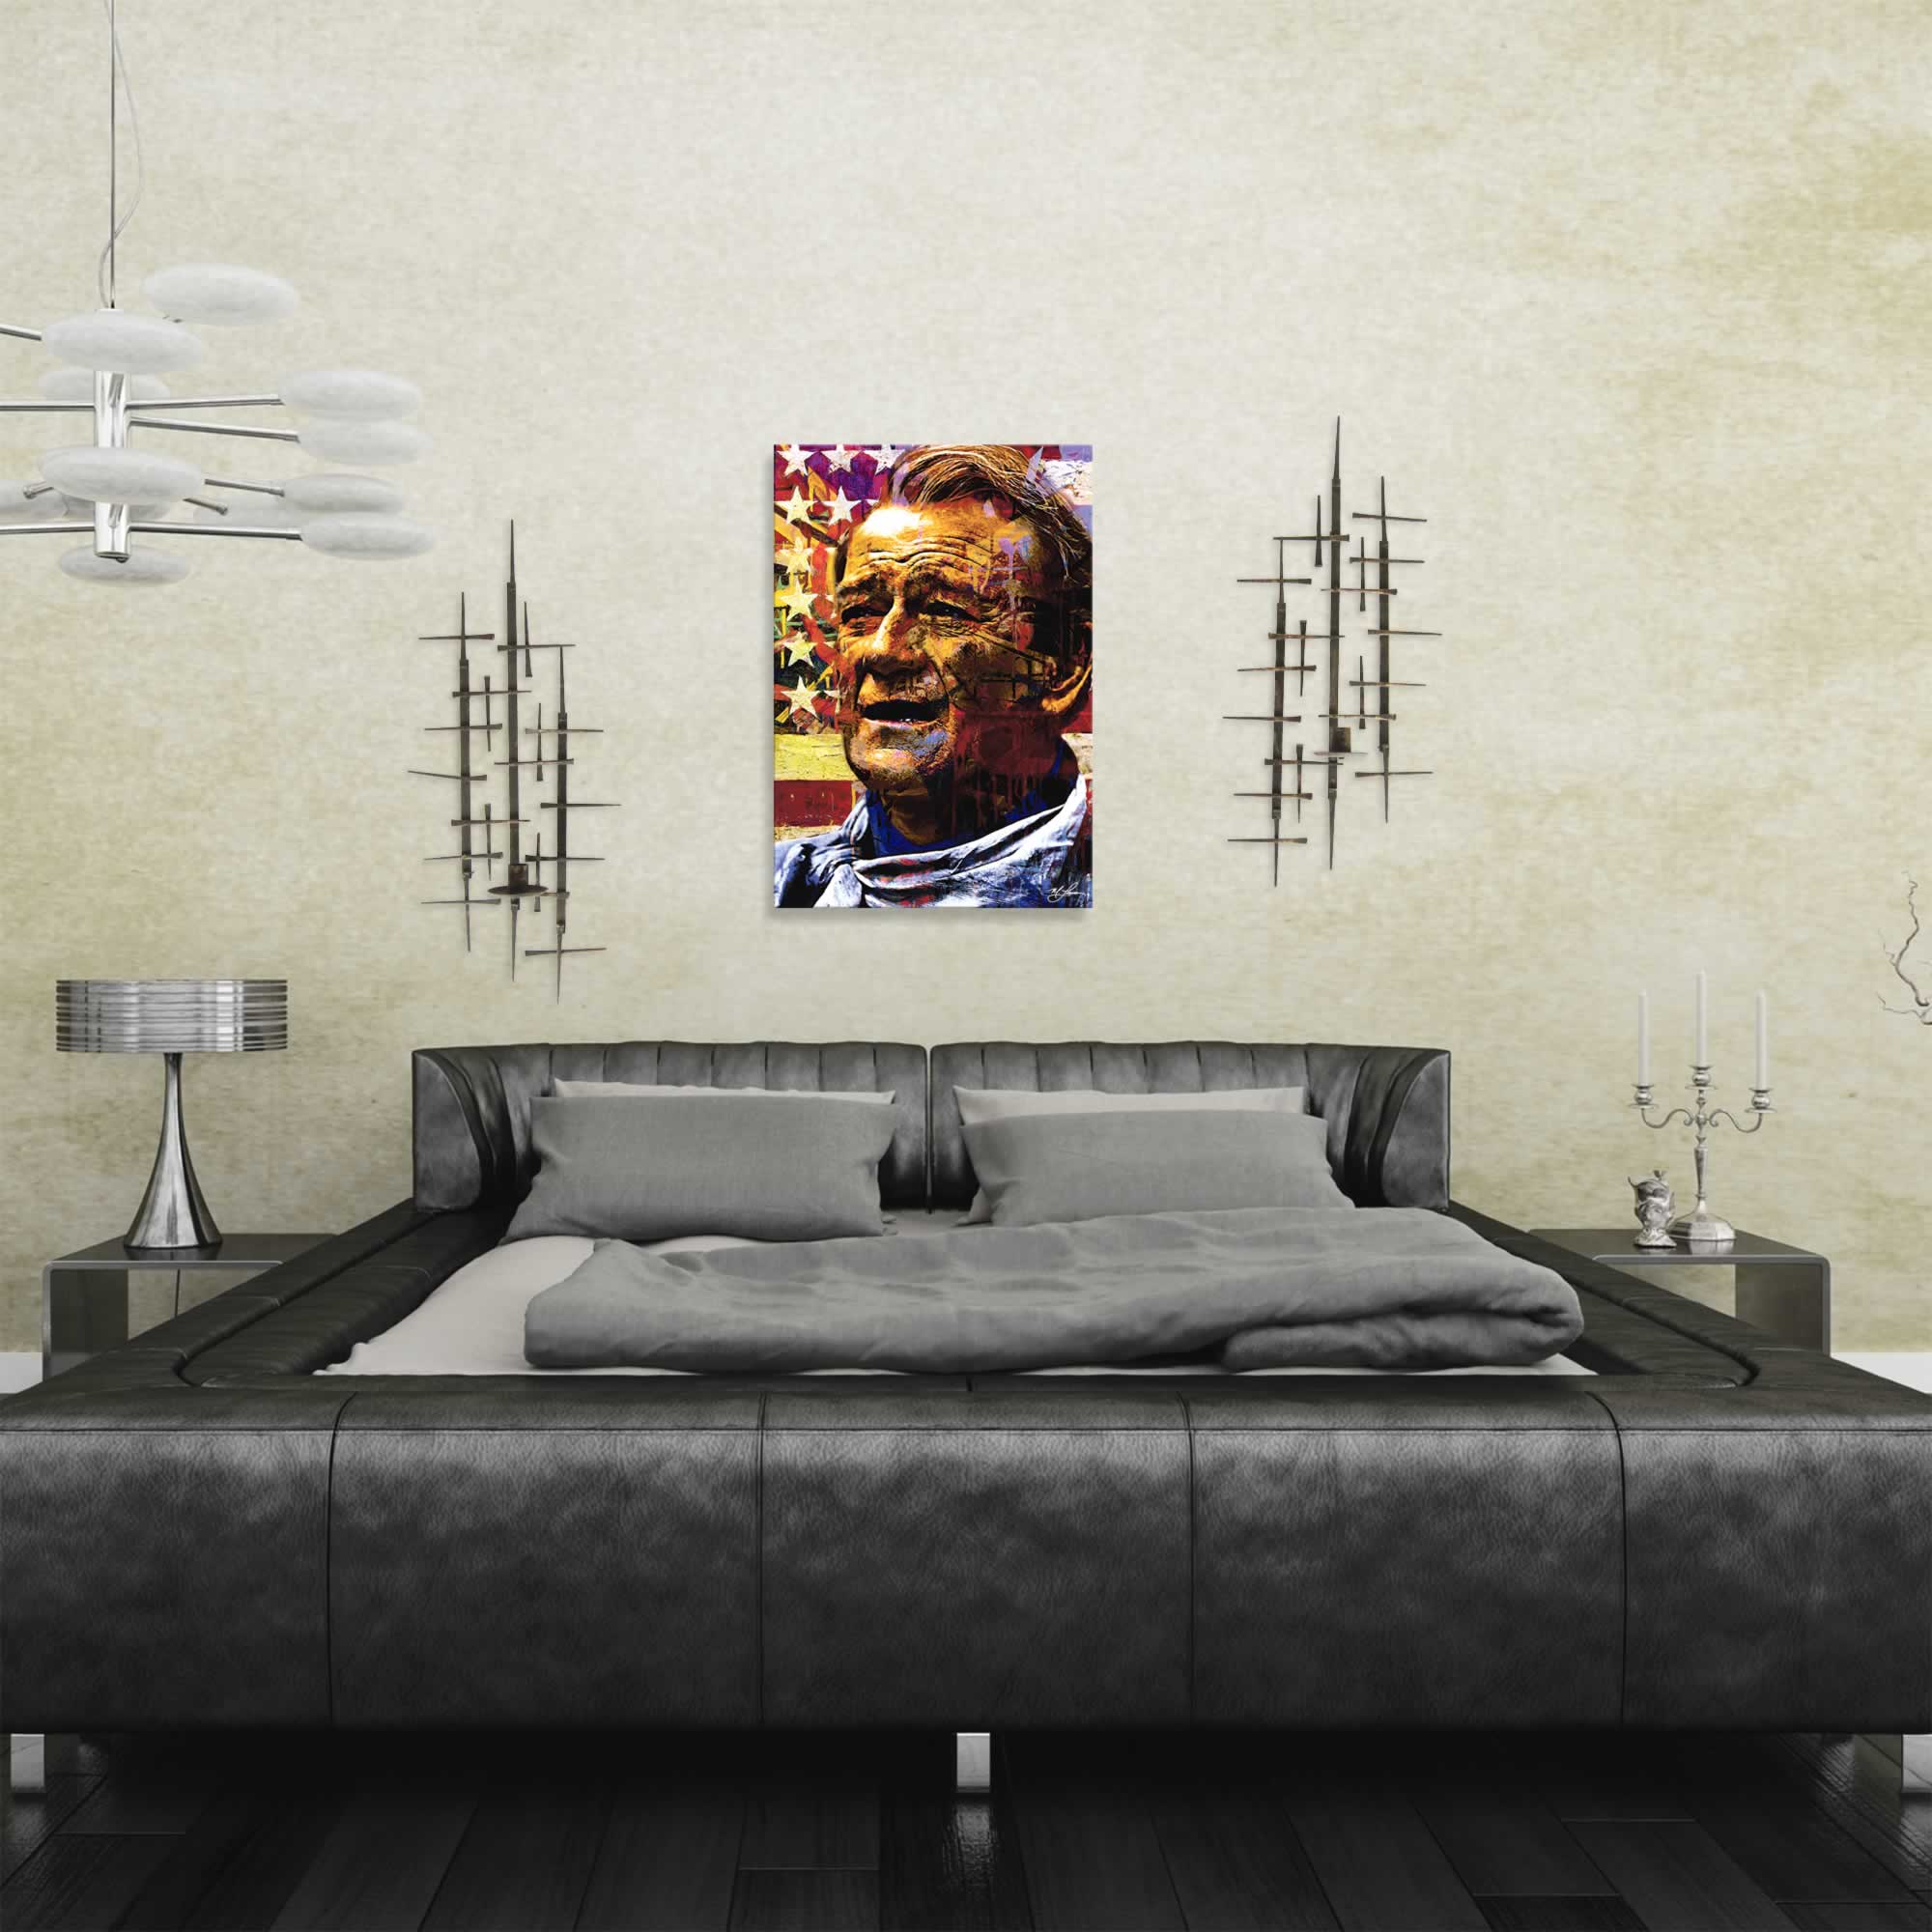 John Wayne Faded Glory by Mark Lewis - Contemporary Pop Art on Metal - Lifestyle View